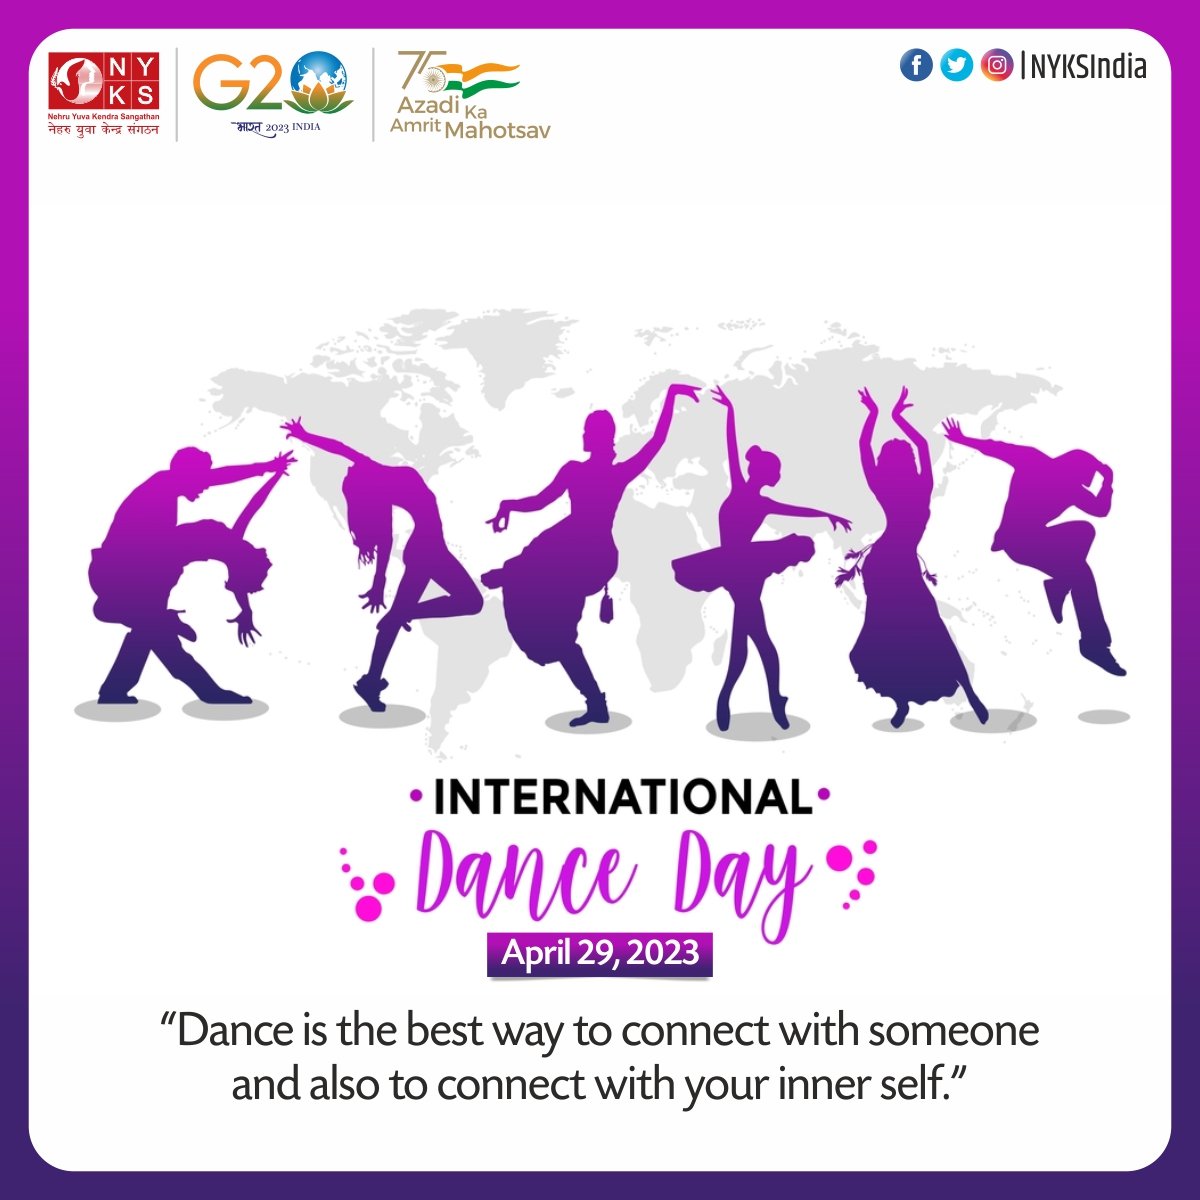 Dance is the way to express your emotions and feelings and dance is also the way to enjoy your body. Wishing you a very Happy International Dance Day! 

#InternationalDanceDay #DanceDay #dancingstars
@Nyksindia